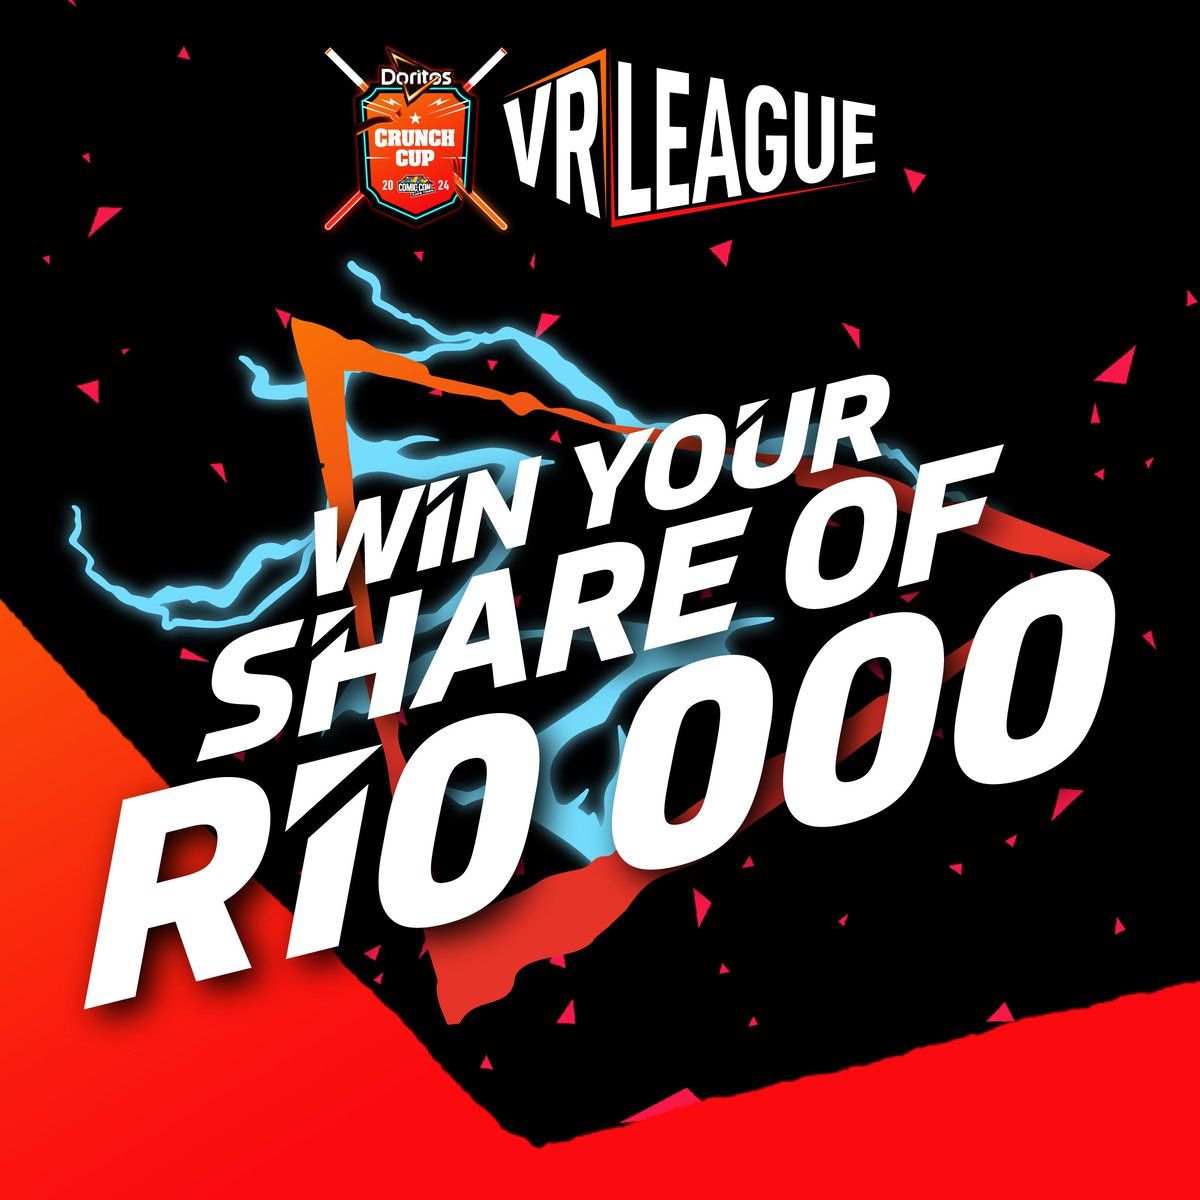 Are you ready for the @DoritosSA VR Beat Saber League! ⚔️ UNLOCK YOUR BOLD and dominate the beats to stand a chance to win your share of R10 000 at #ComicConCapeTown. Head to the Doritos Crunch Zone at #ComicConCapeTown. Free-To-Play on All Con days. comicconafrica.co.za/dcc/